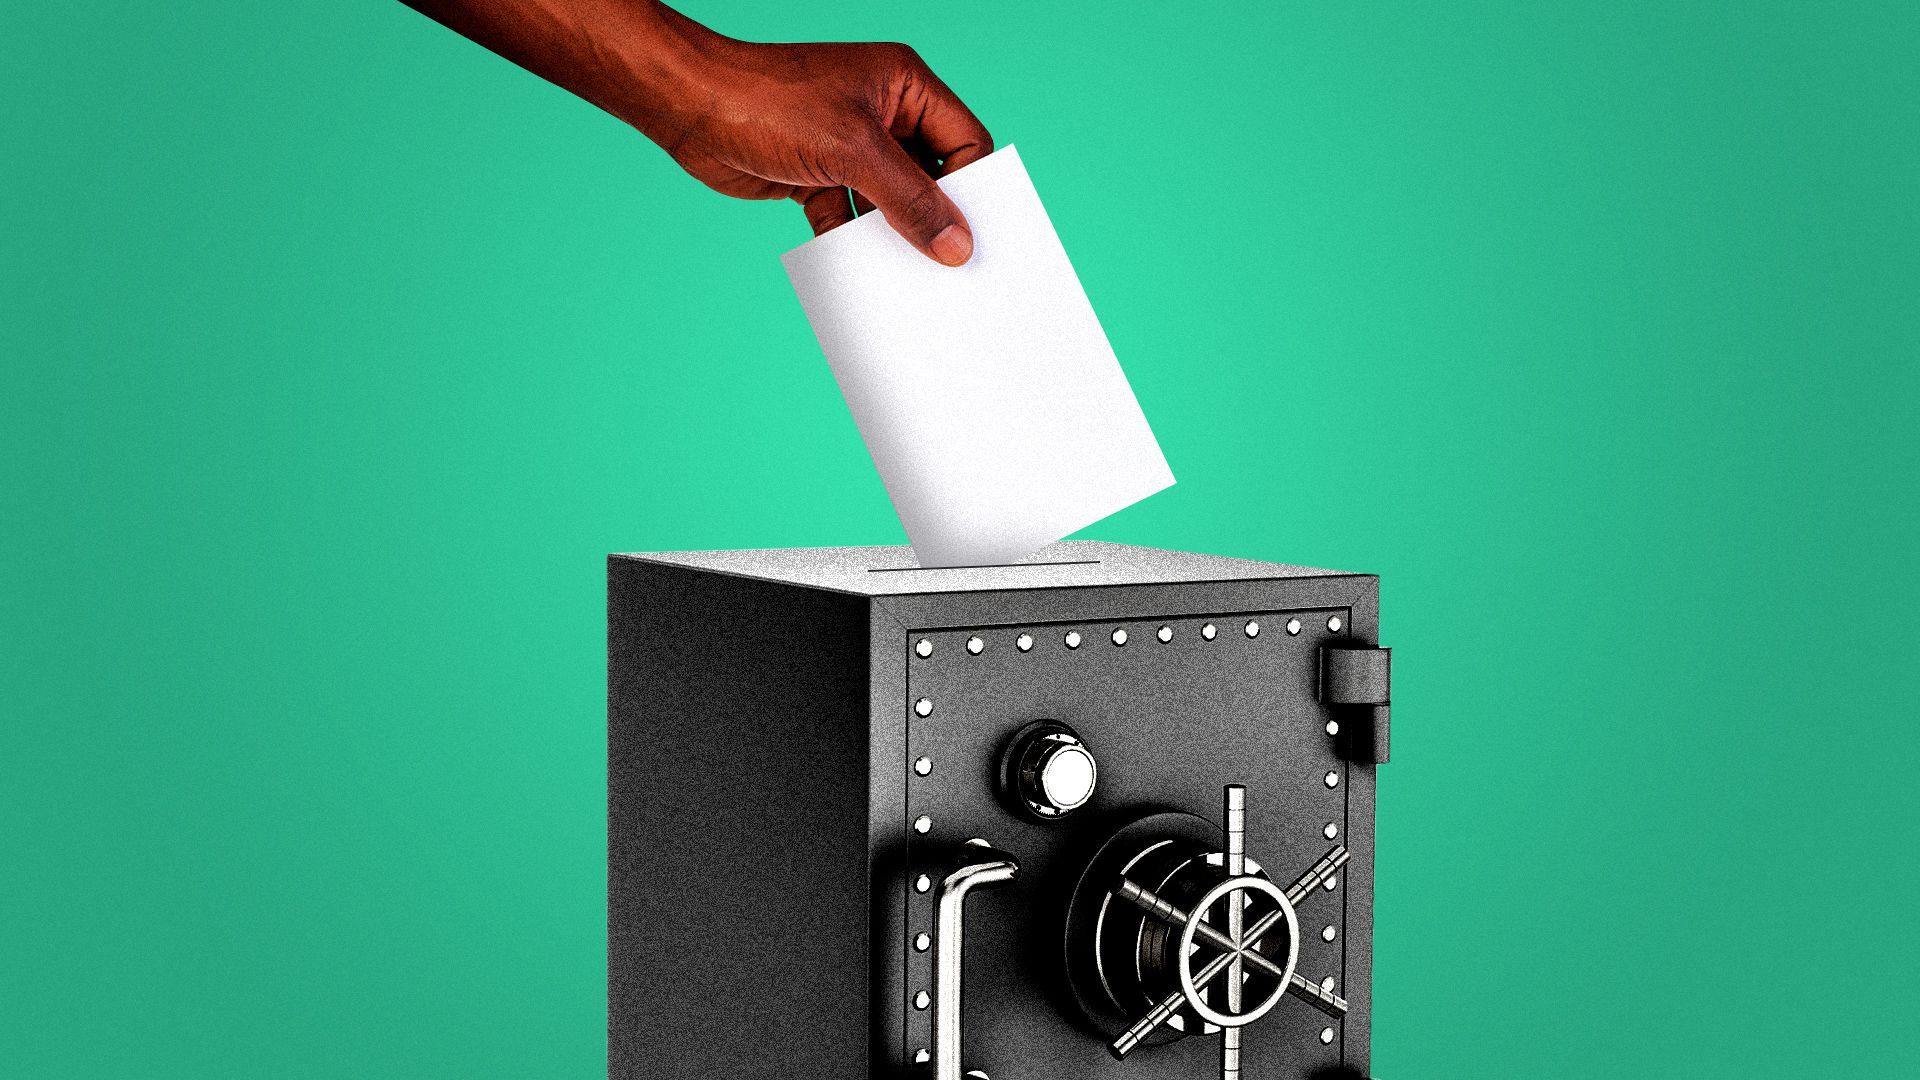 Illustration of a hand putting a ballot into a slit at the top of a safe as if it were an ballot box. 